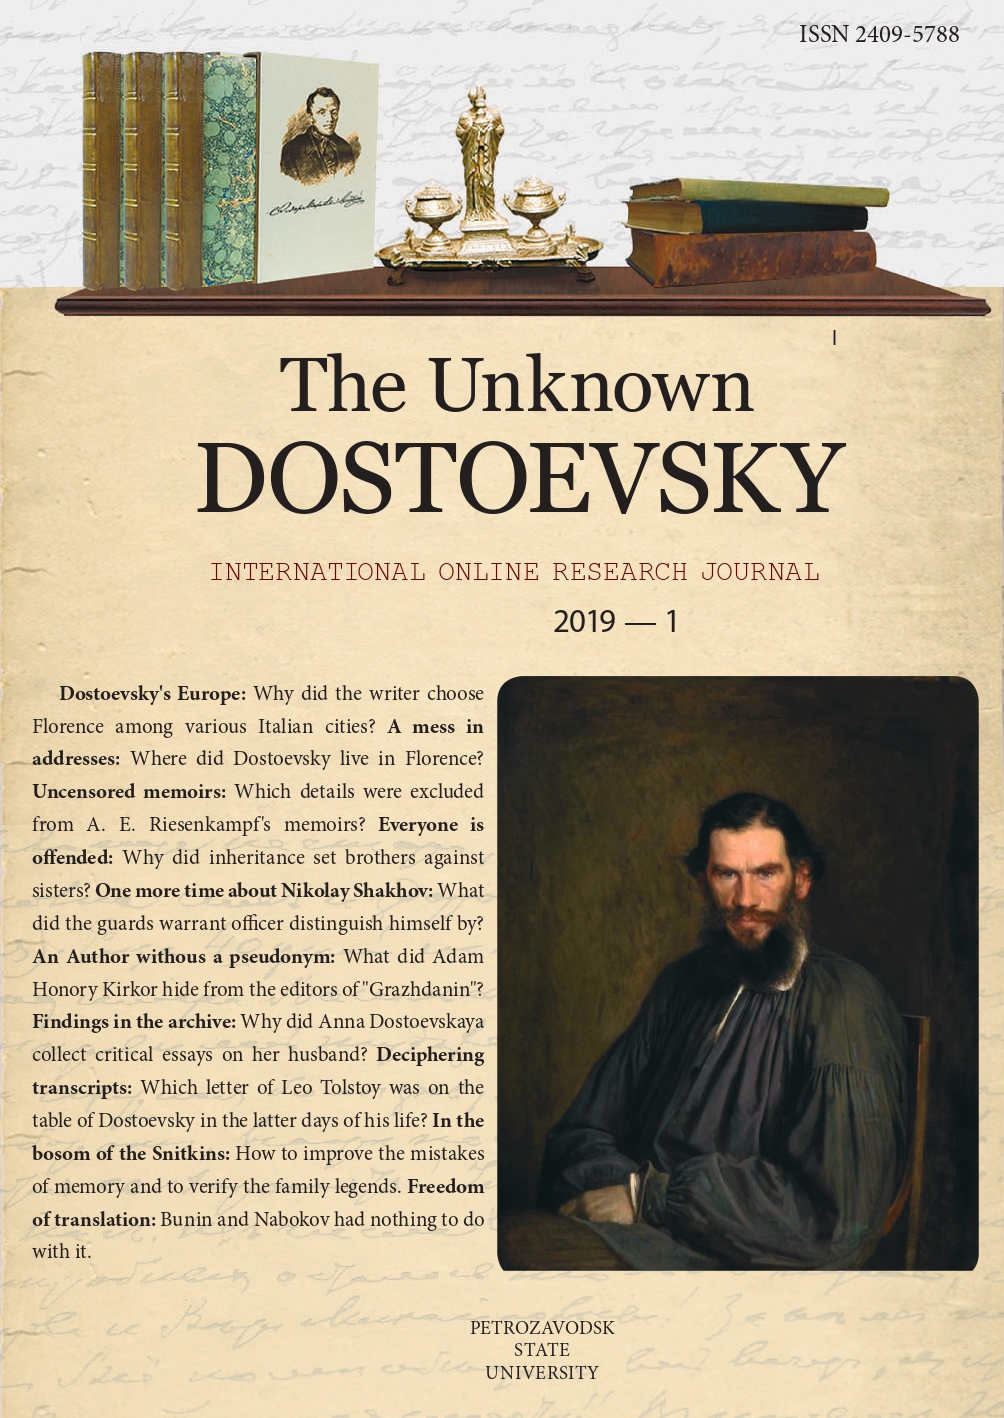 The Snitkins Who Became Relatives of Dostoevsky